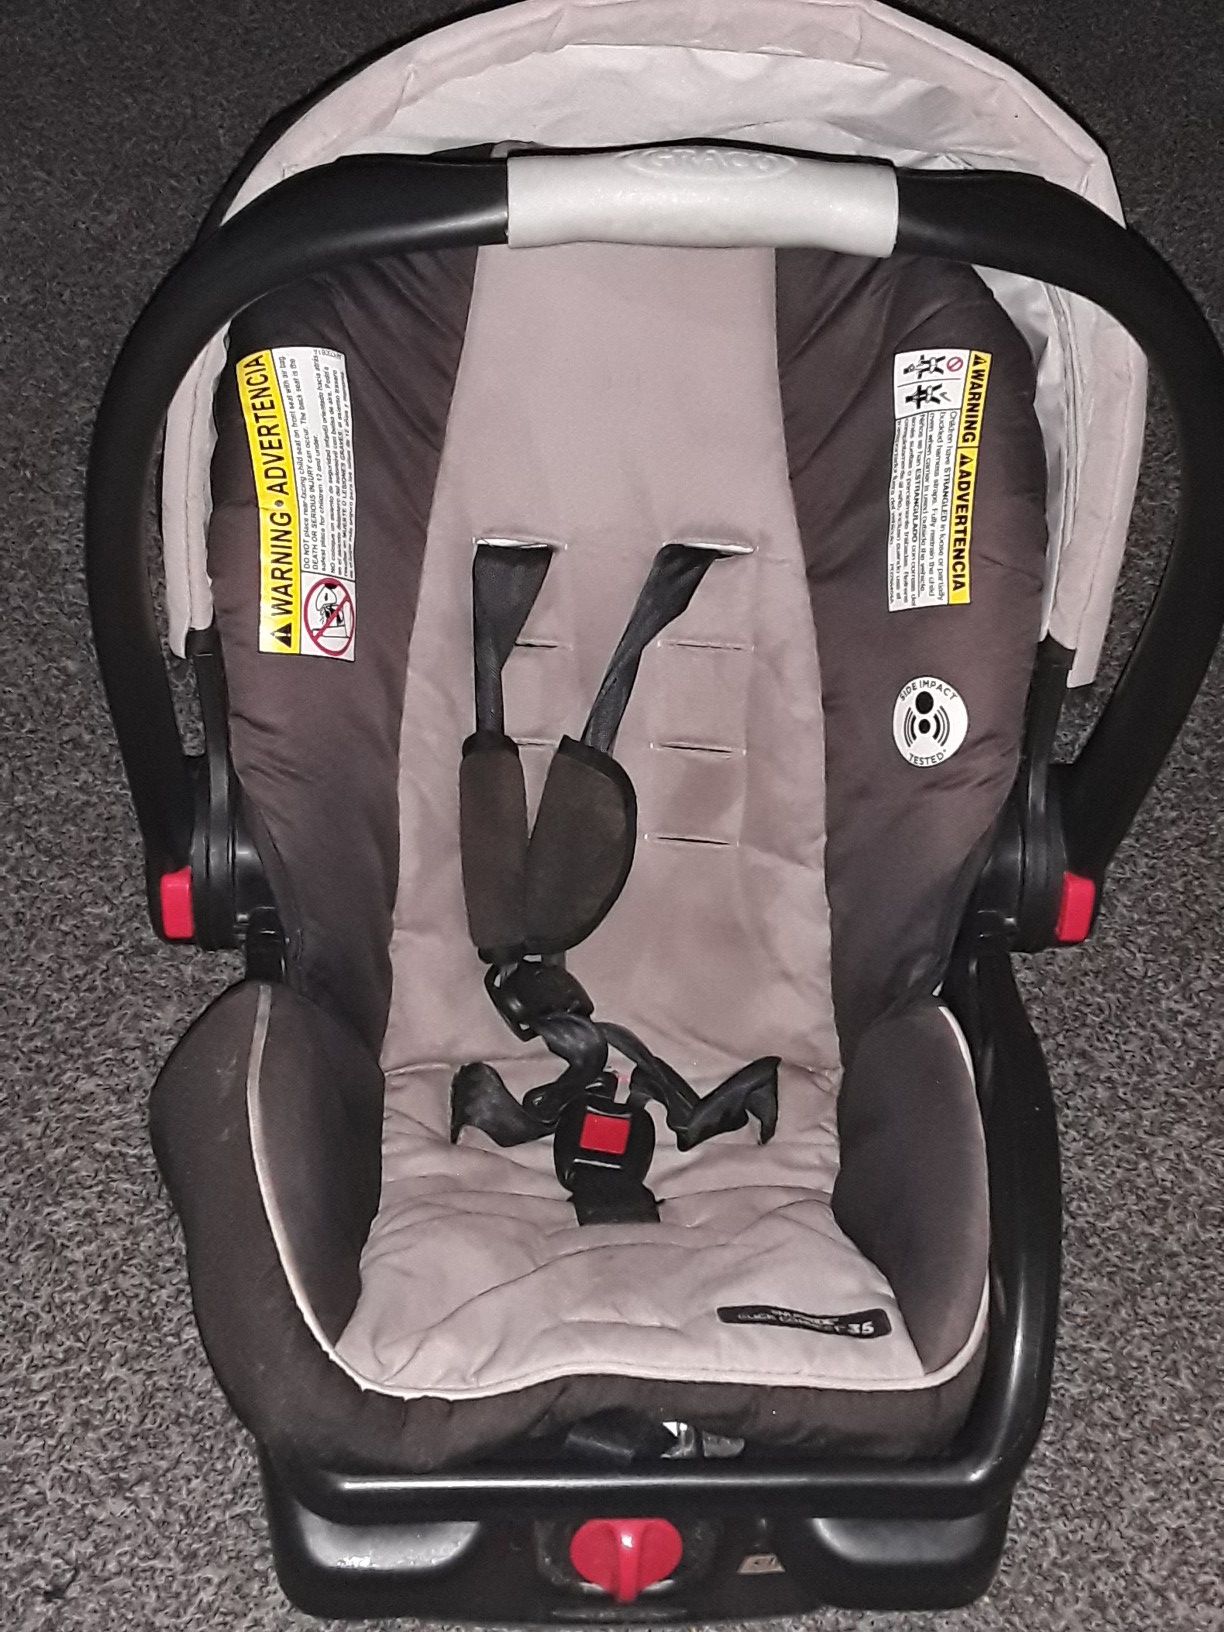 Infant car seat excellent used condition